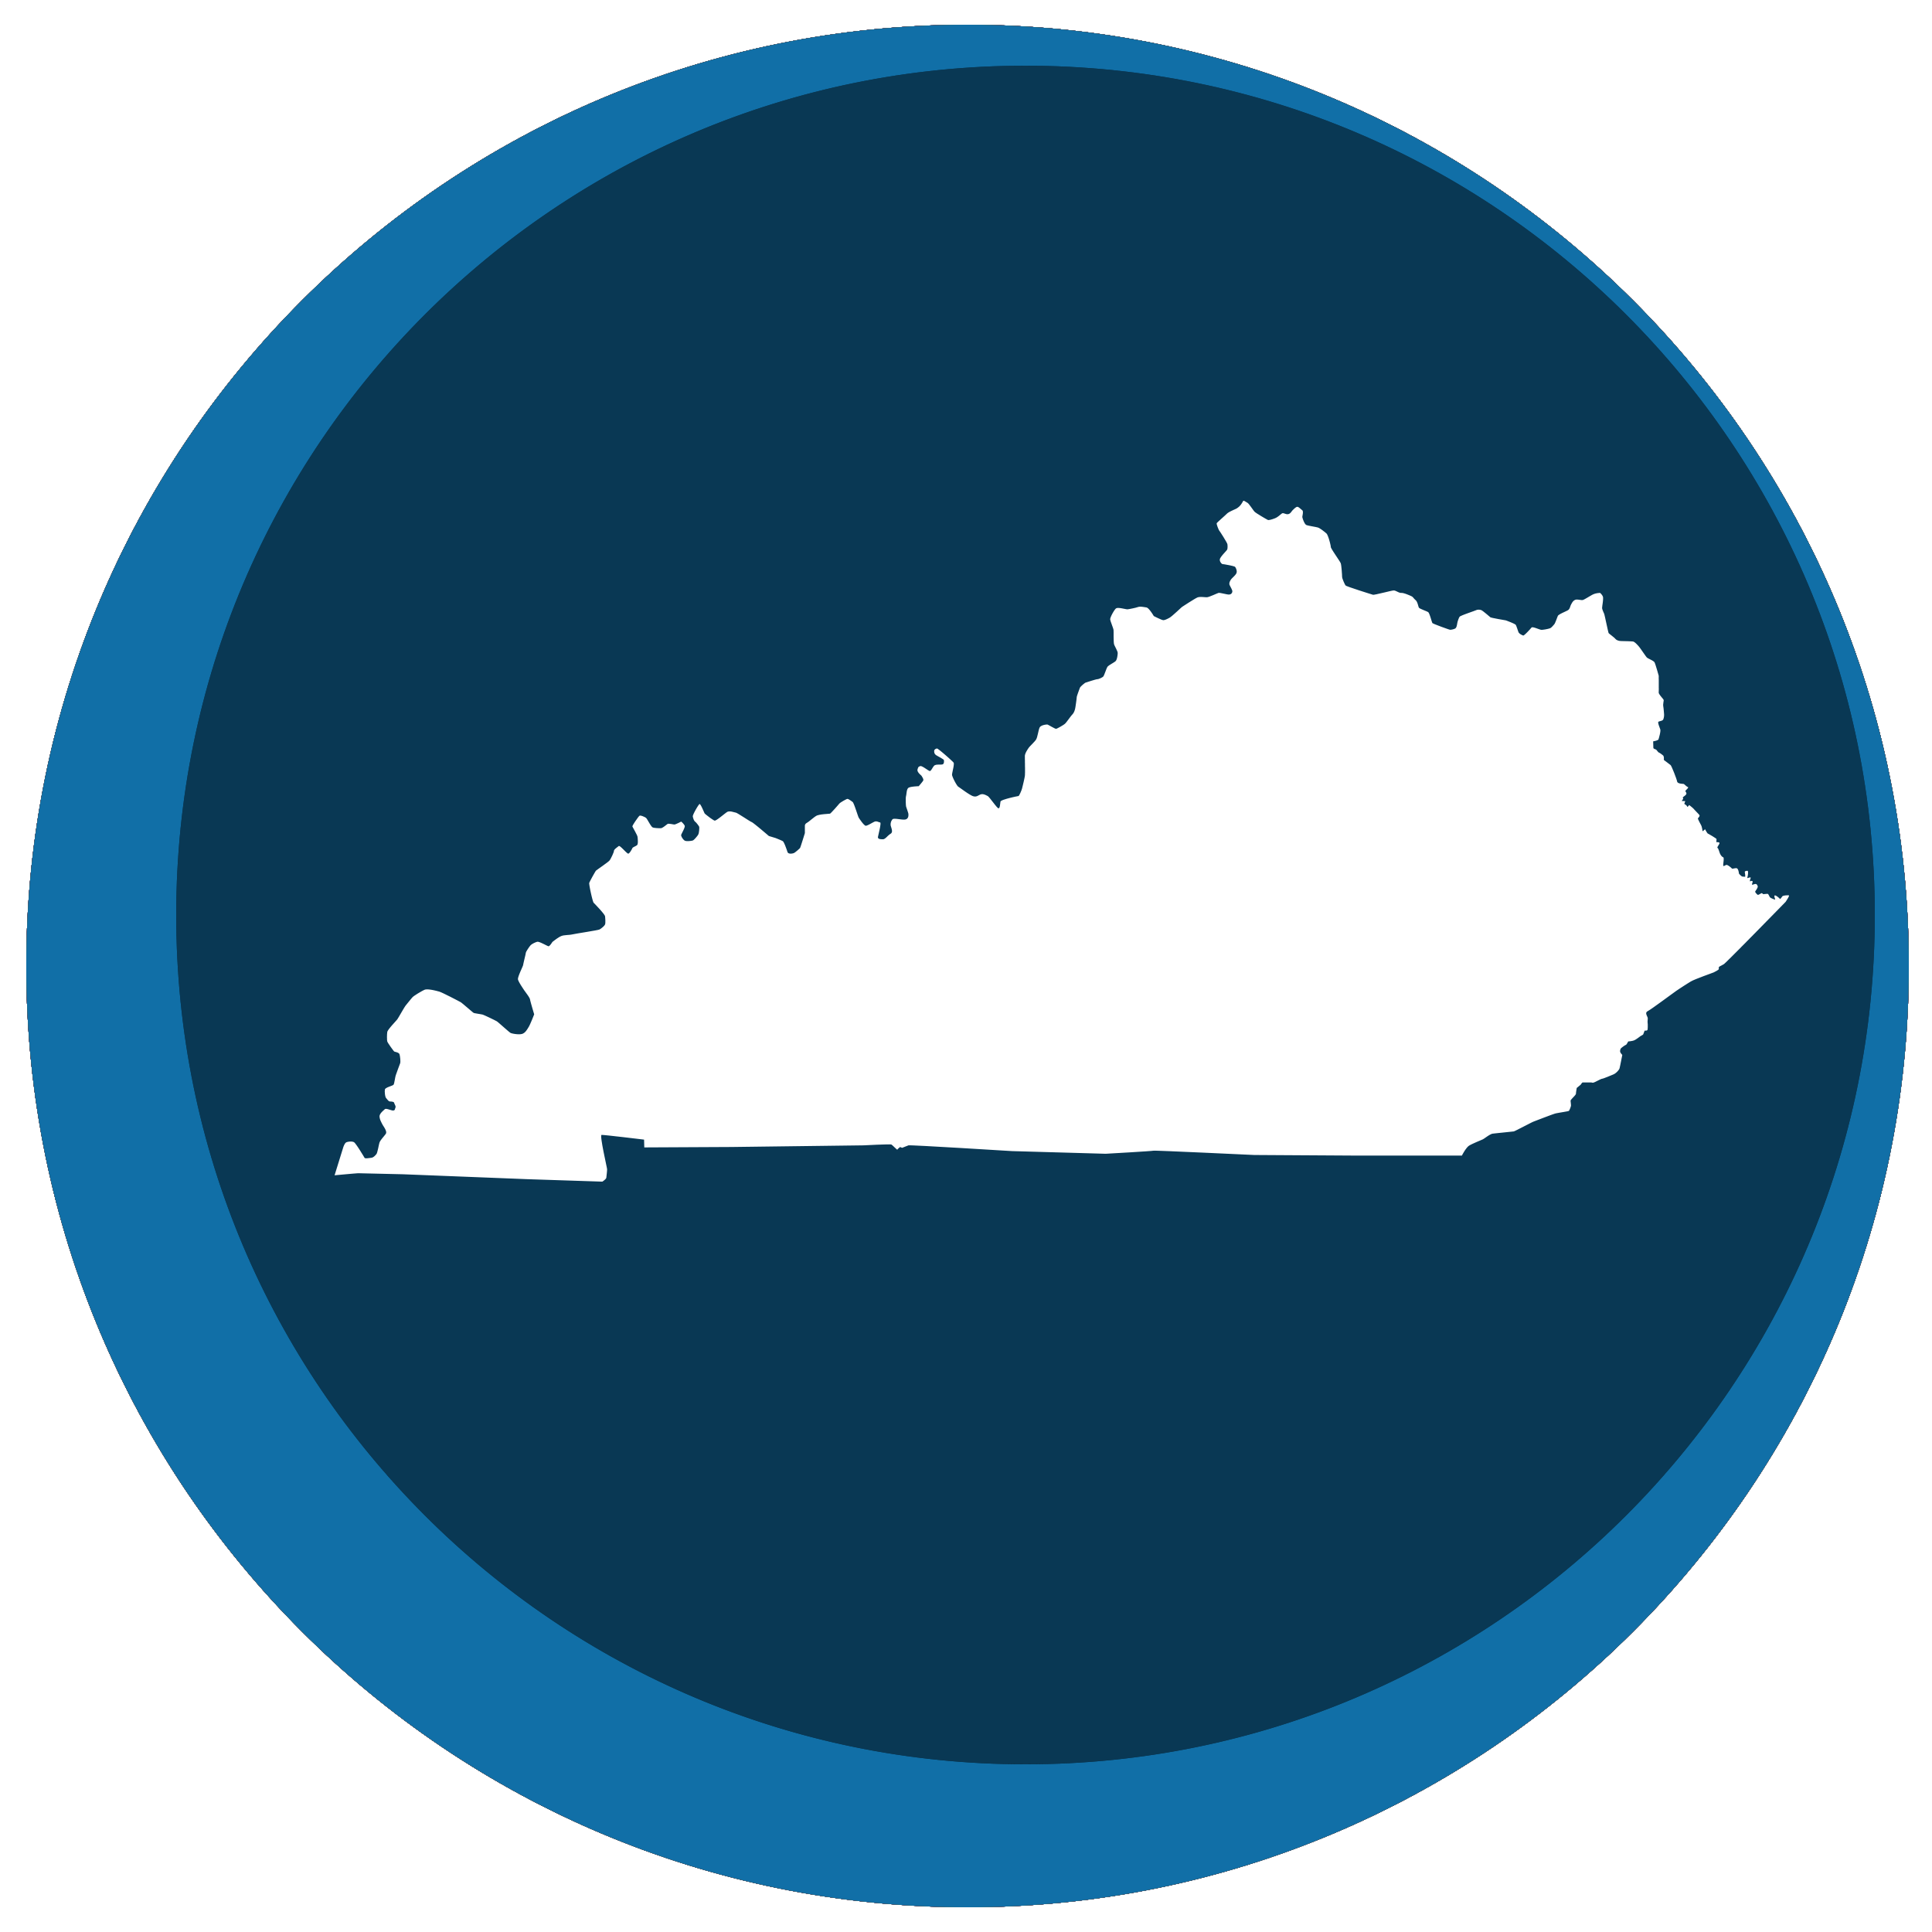 Kentucky state shape in a circle